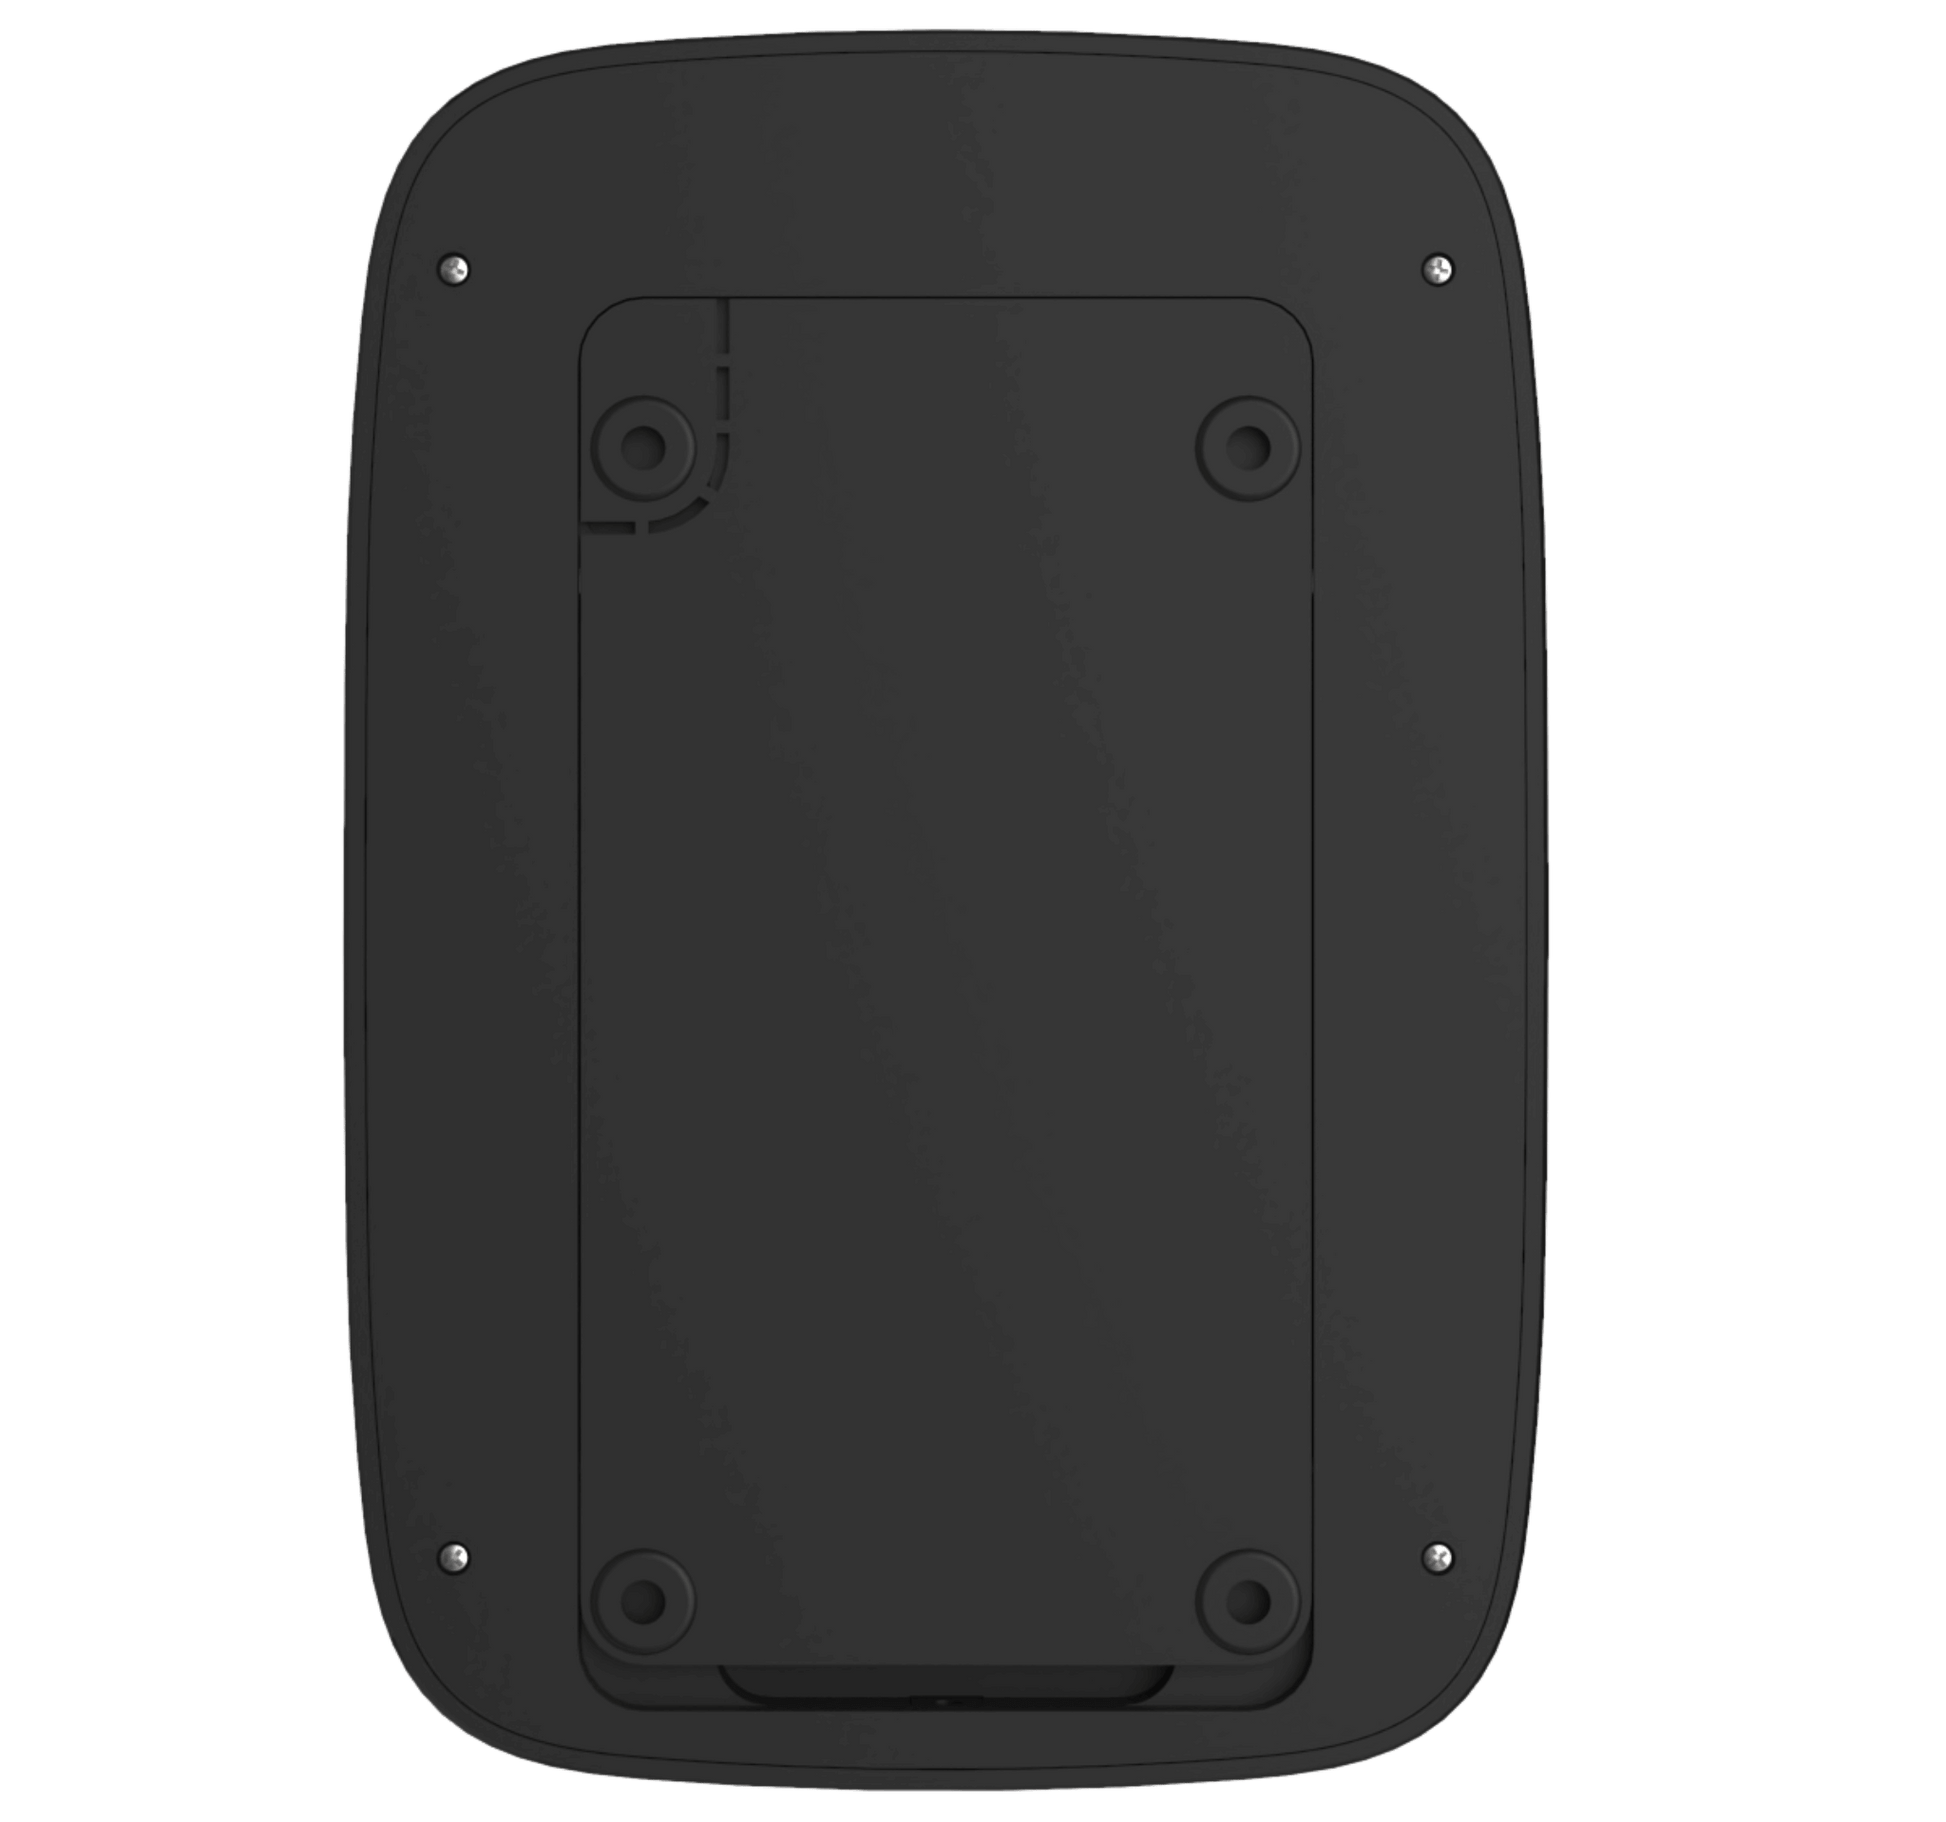 Black Ajax KeyPad Plus a wireless touch keypad for home security, 165 × 113 × 20 mm in size, 267 grams in weight. used for the the Ajax security system, back view of device